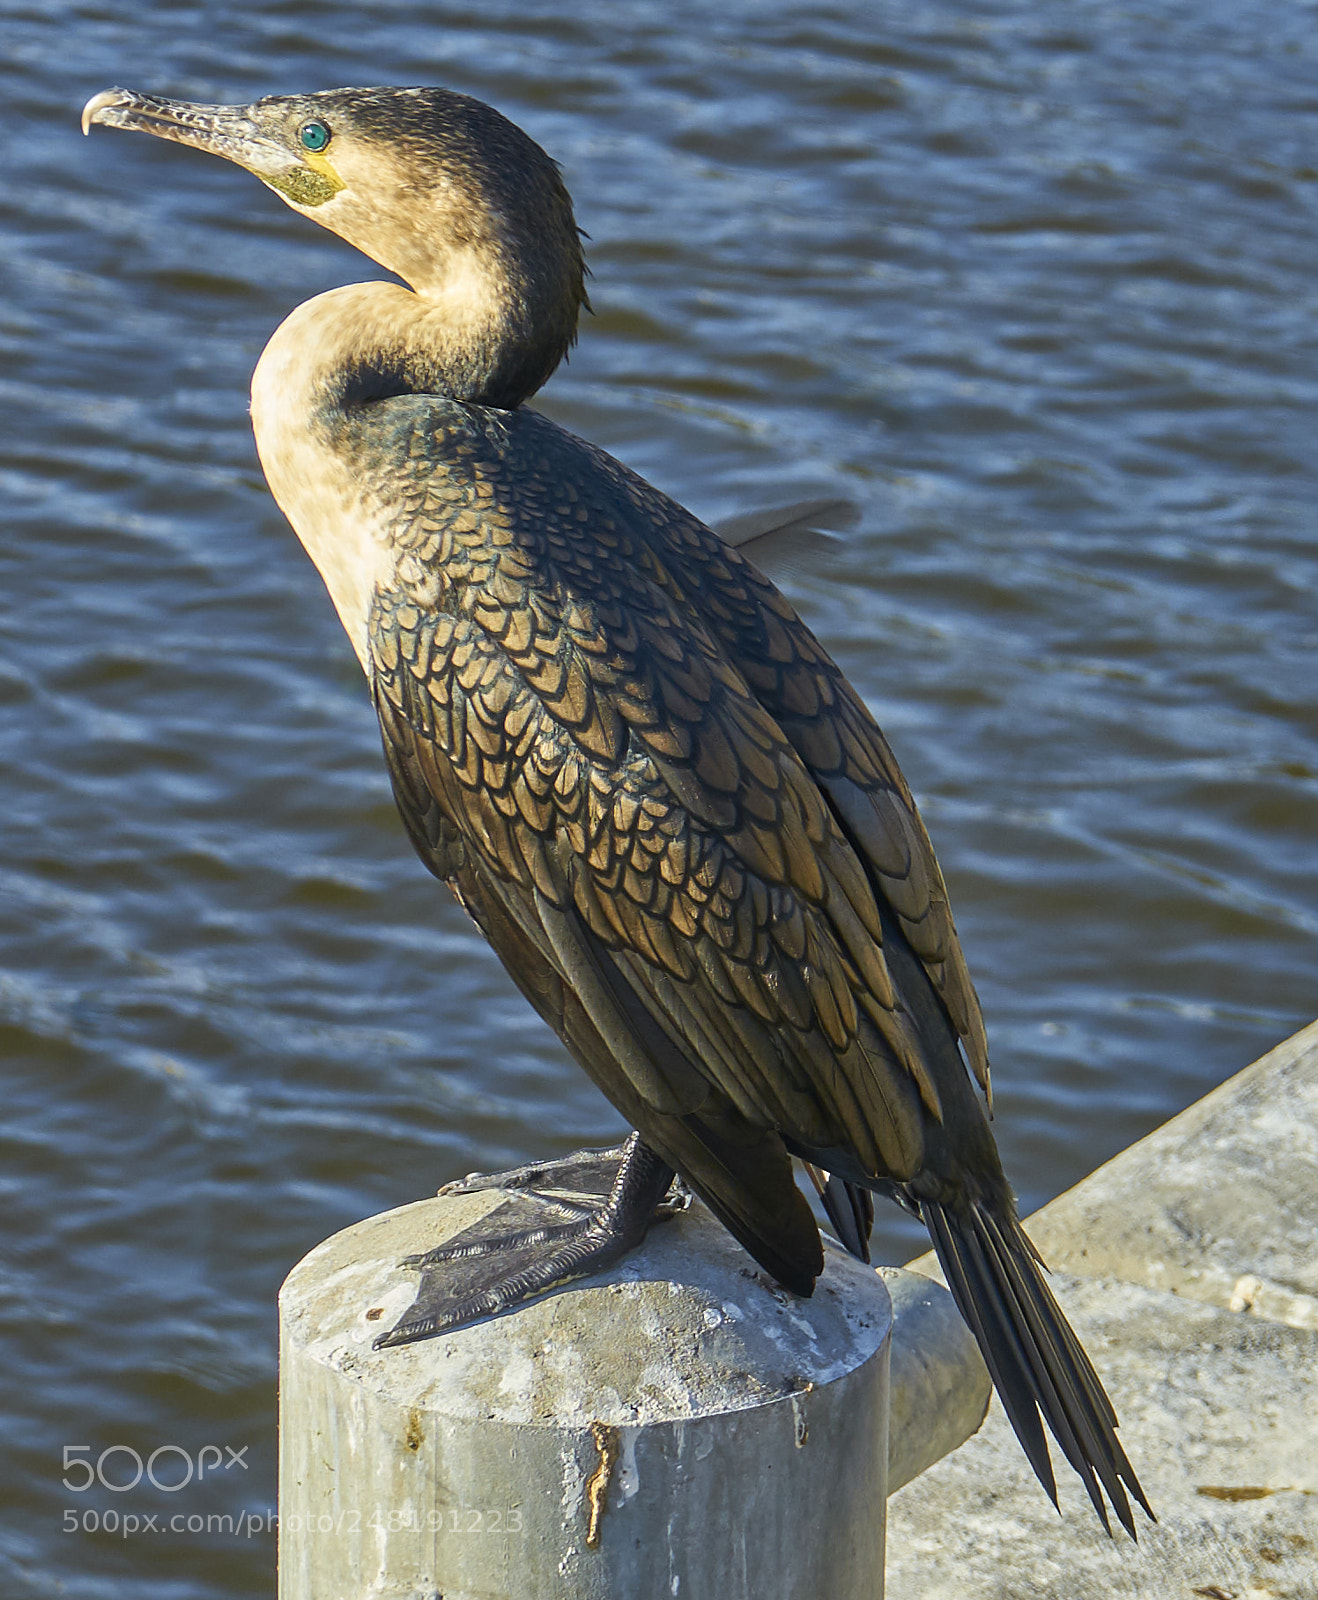 Sony a7 II sample photo. White breasted cormorant photography